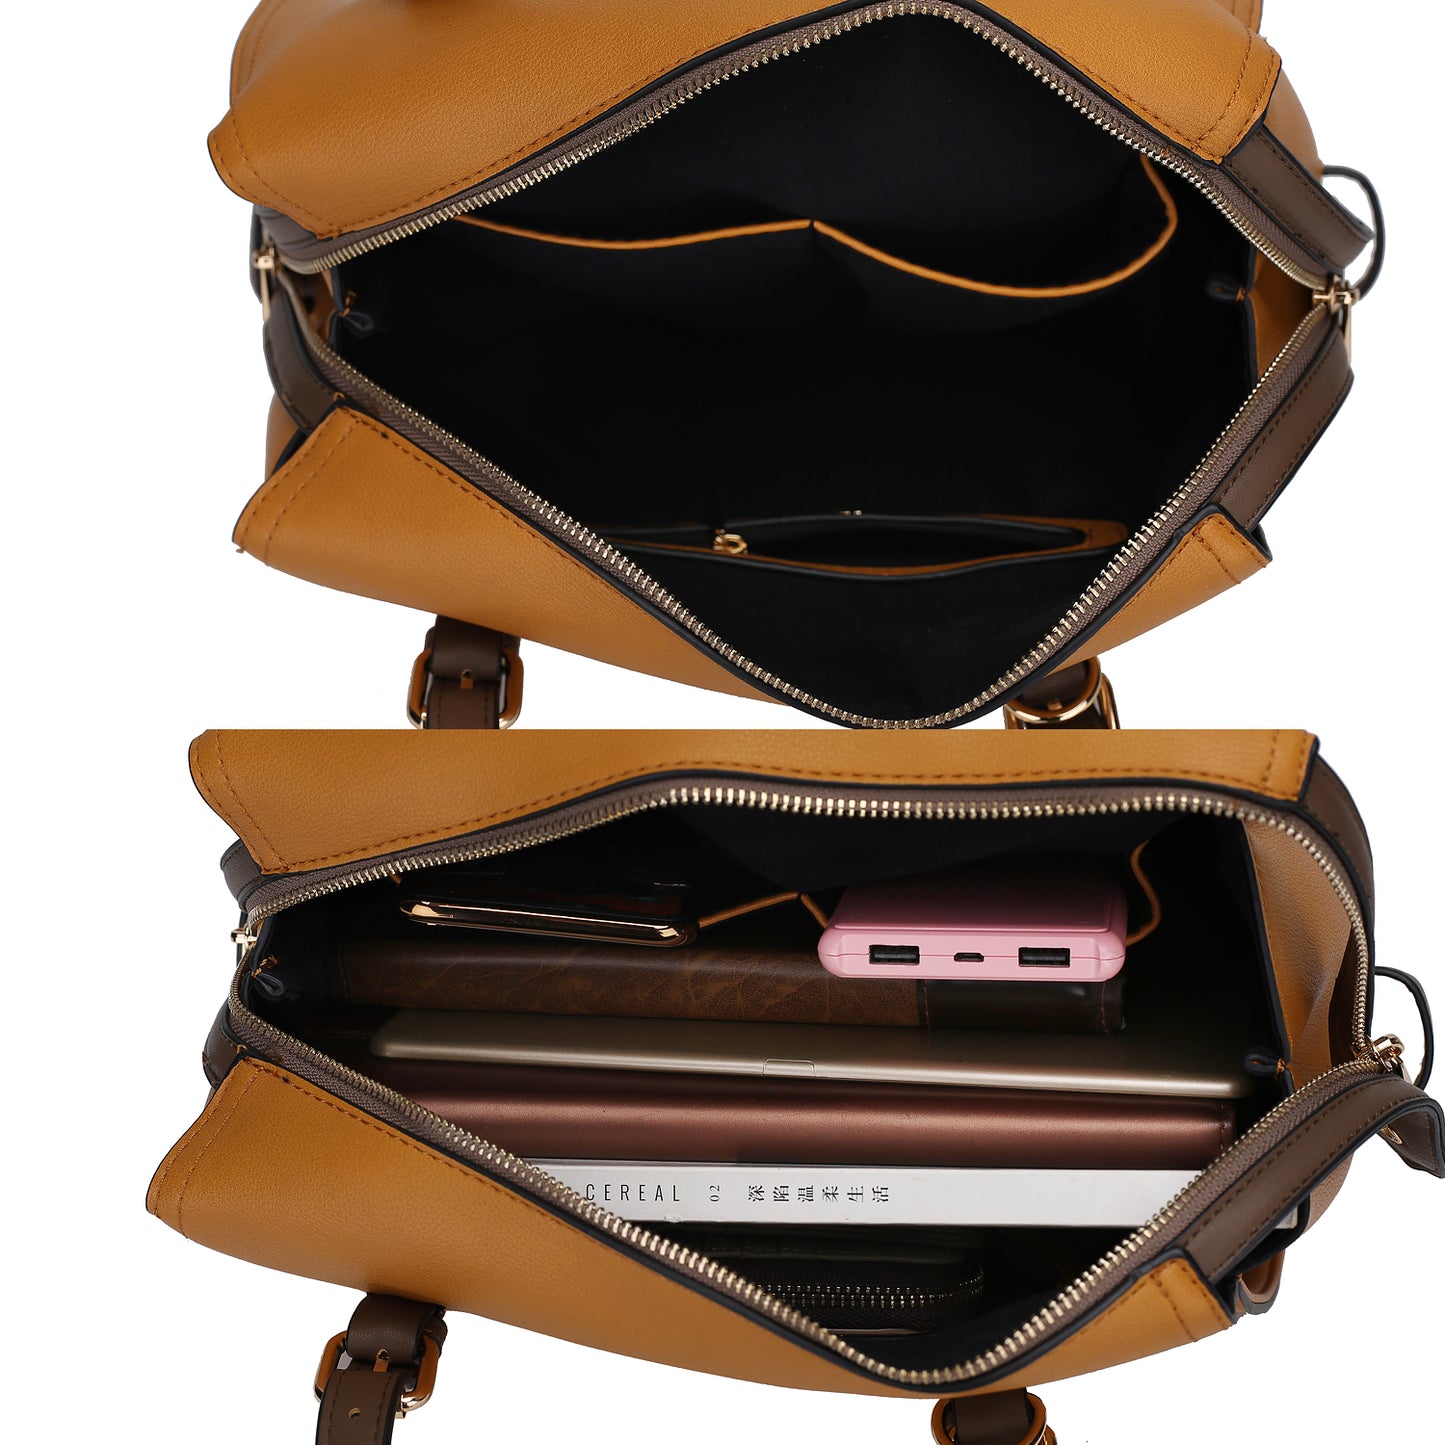 A Pink Orpheus Elise Vegan Leather Color-block Women Satchel Bag with two compartments and a cell phone.